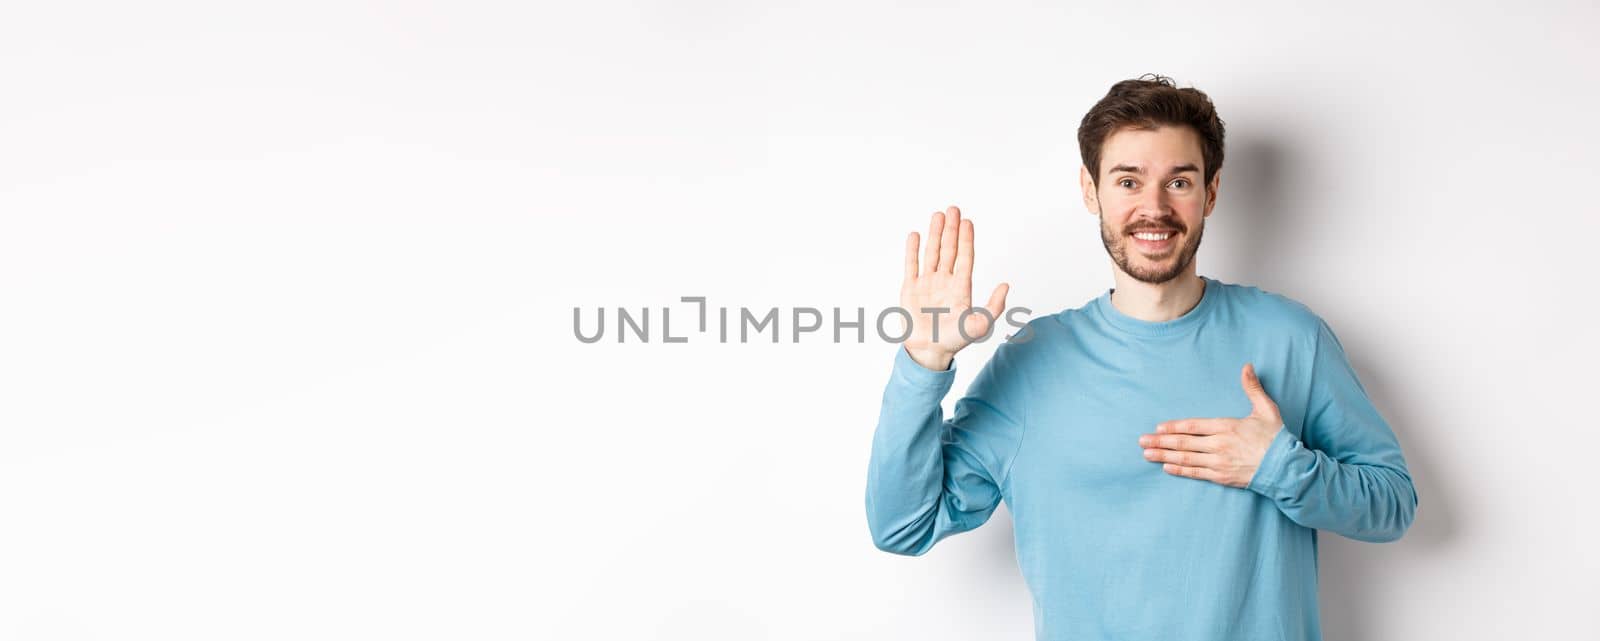 Smiling hosent man raising arm and hold hand on heart, making promise tell truth, swear or give oath, standing over white background.